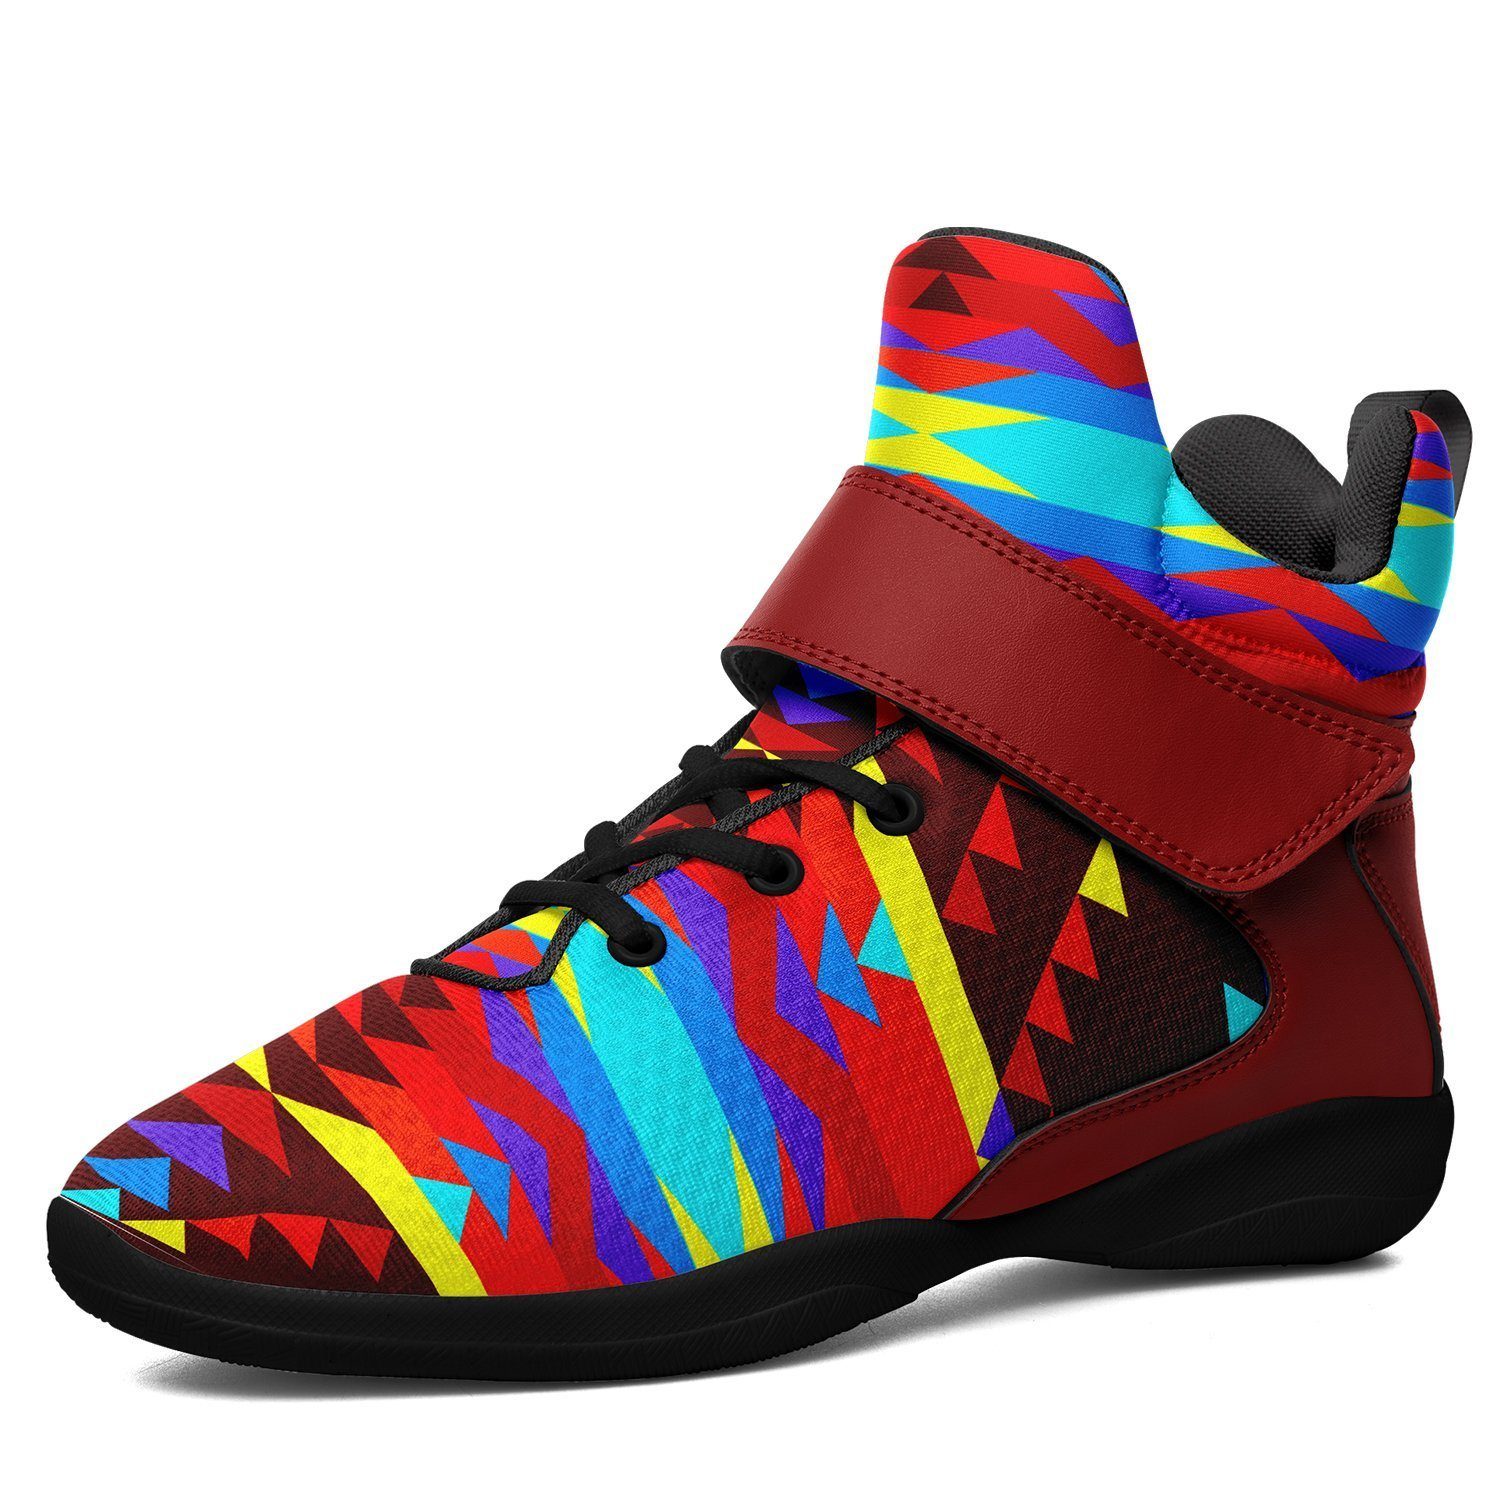 Visions of Lasting Peace Ipottaa Basketball / Sport High Top Shoes -Black Sole 49 Dzine US Men 7 / EUR 40 Black Sole with Dark Red Strap 